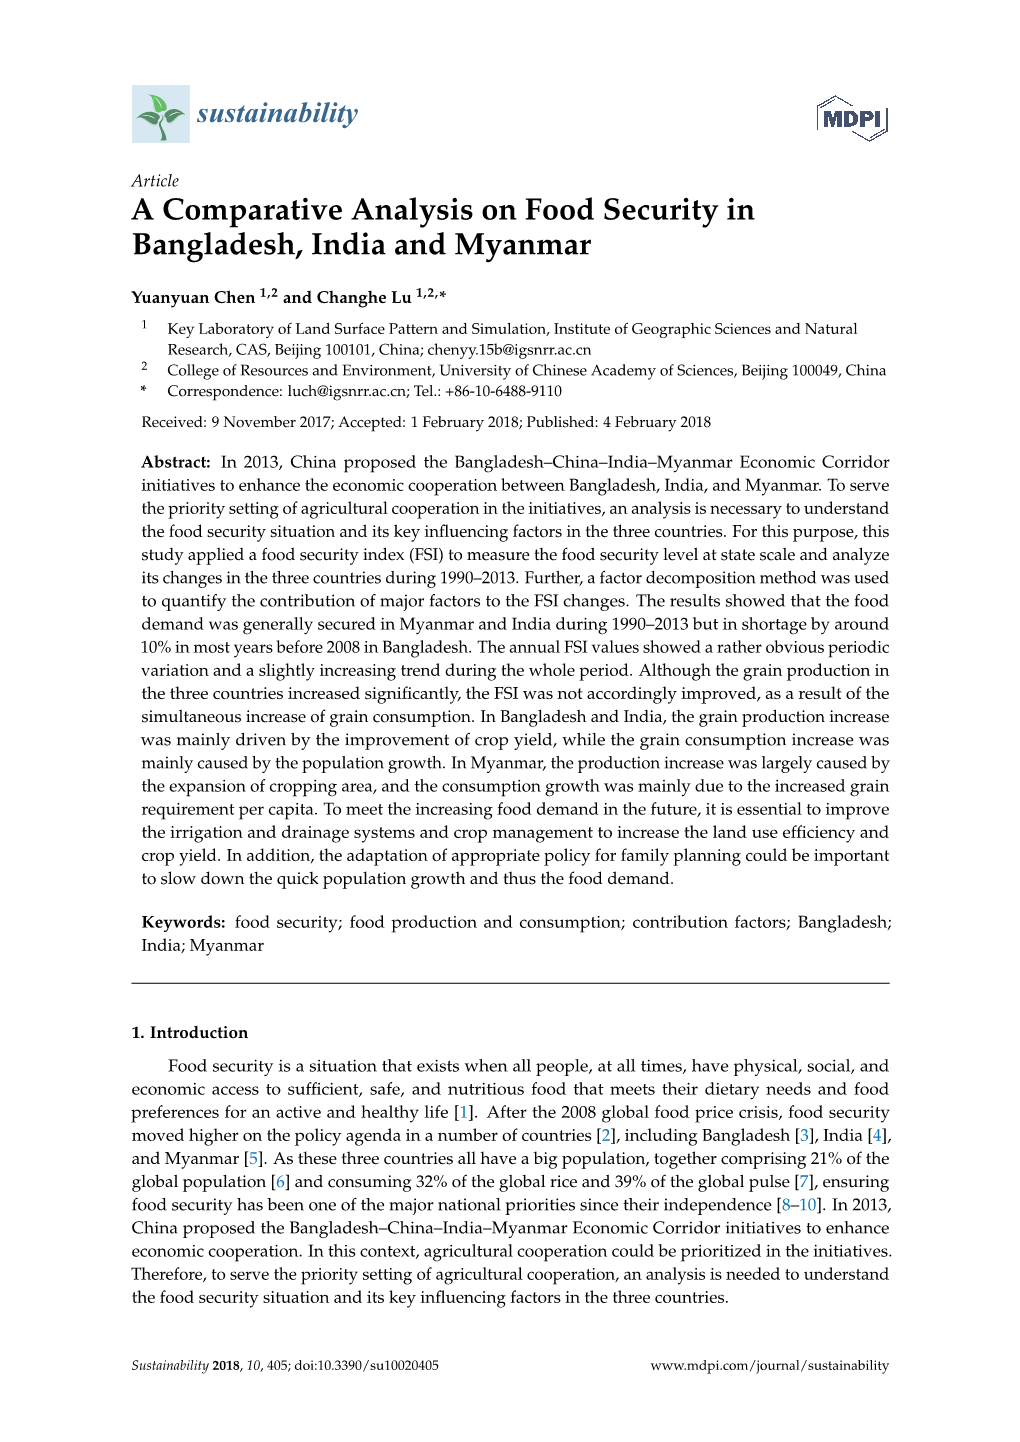 A Comparative Analysis on Food Security in Bangladesh, India and Myanmar